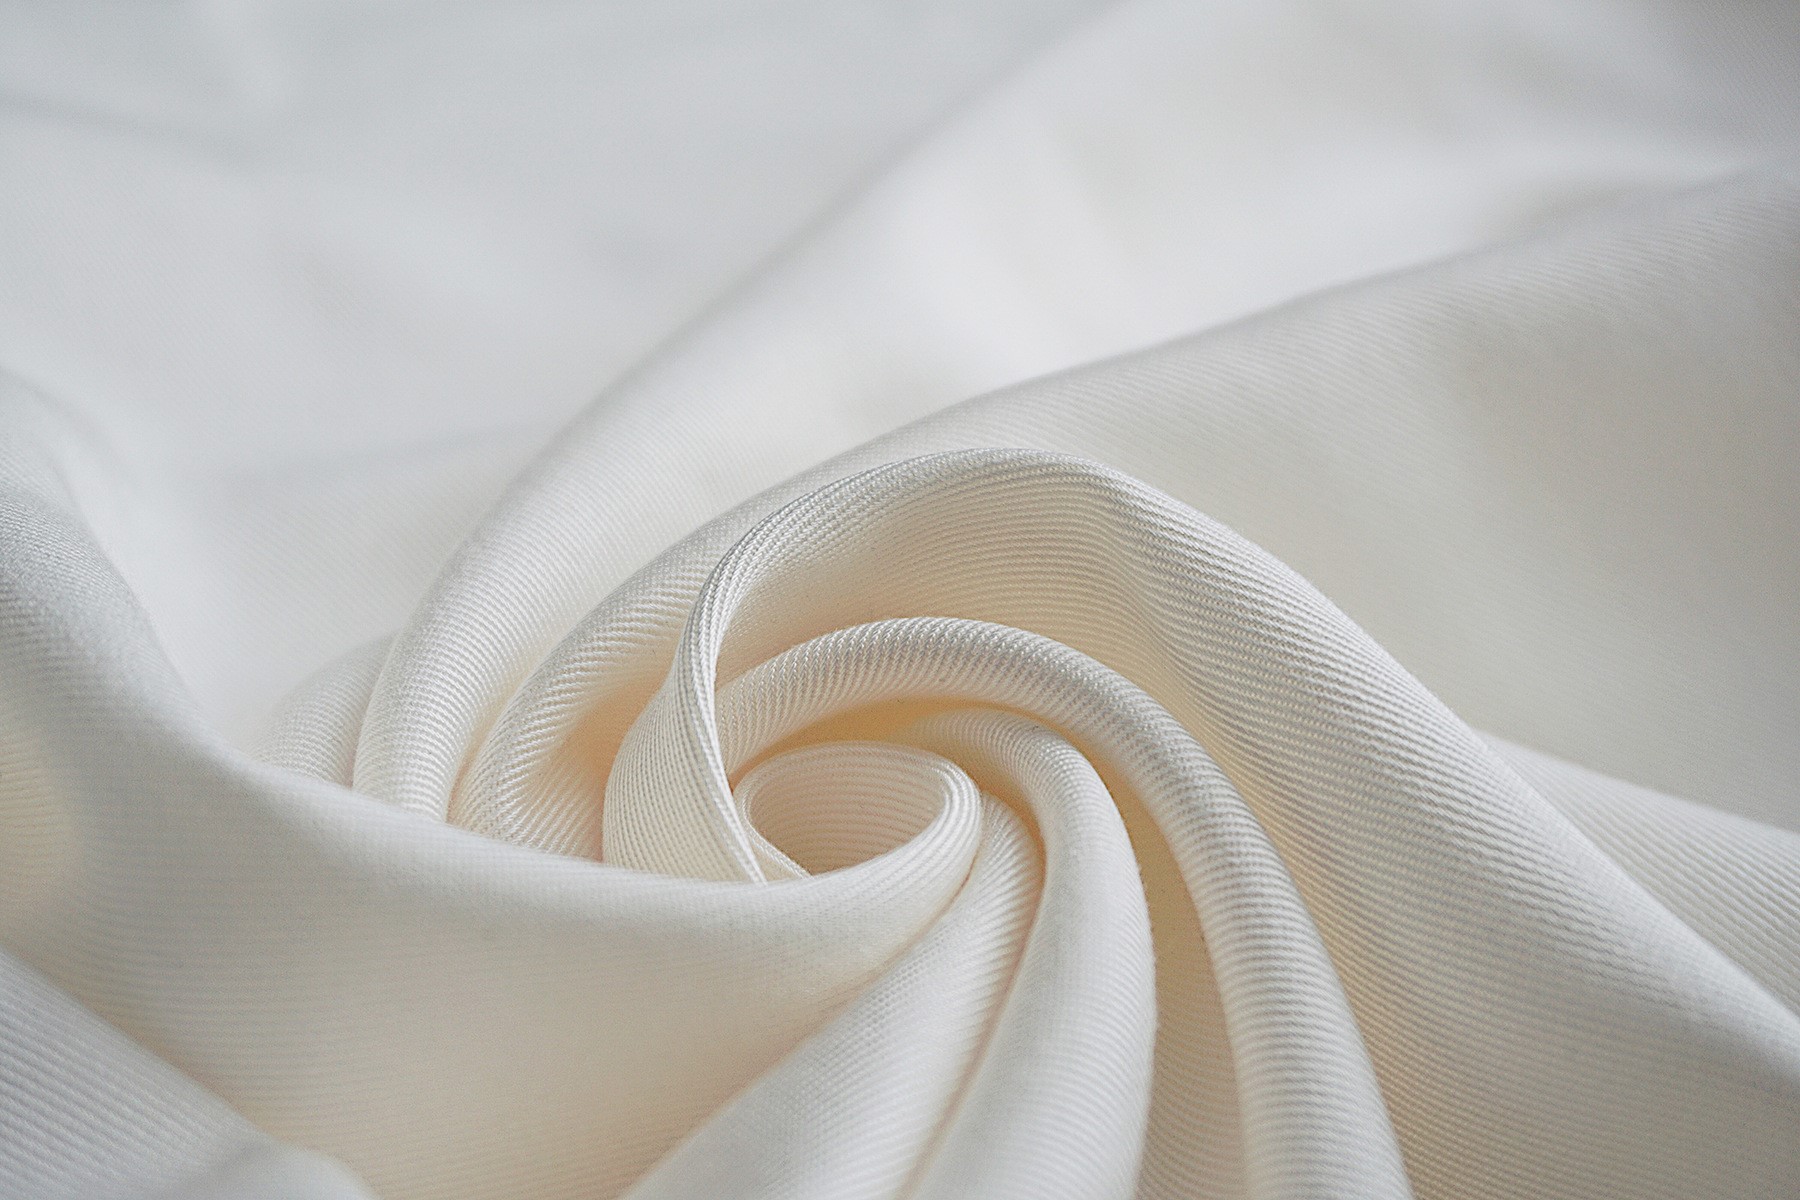 What Fabrics Are Most Commonly Used to Make Clothing?